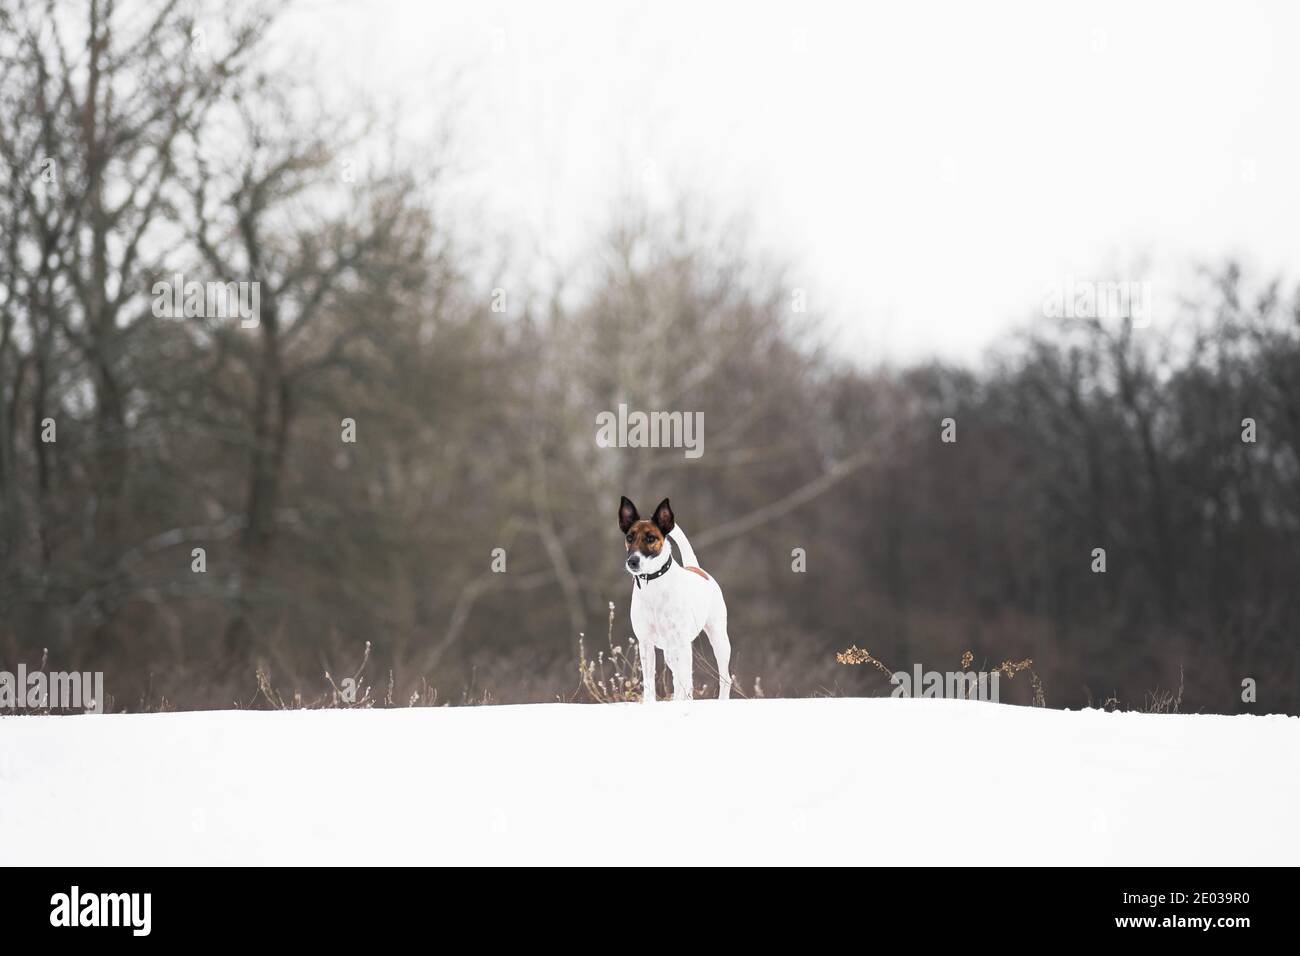 Fox terrier dog in the snowy forest. Spending outdoor time with dogs in winter, cold season active lifestyle with pets Stock Photo